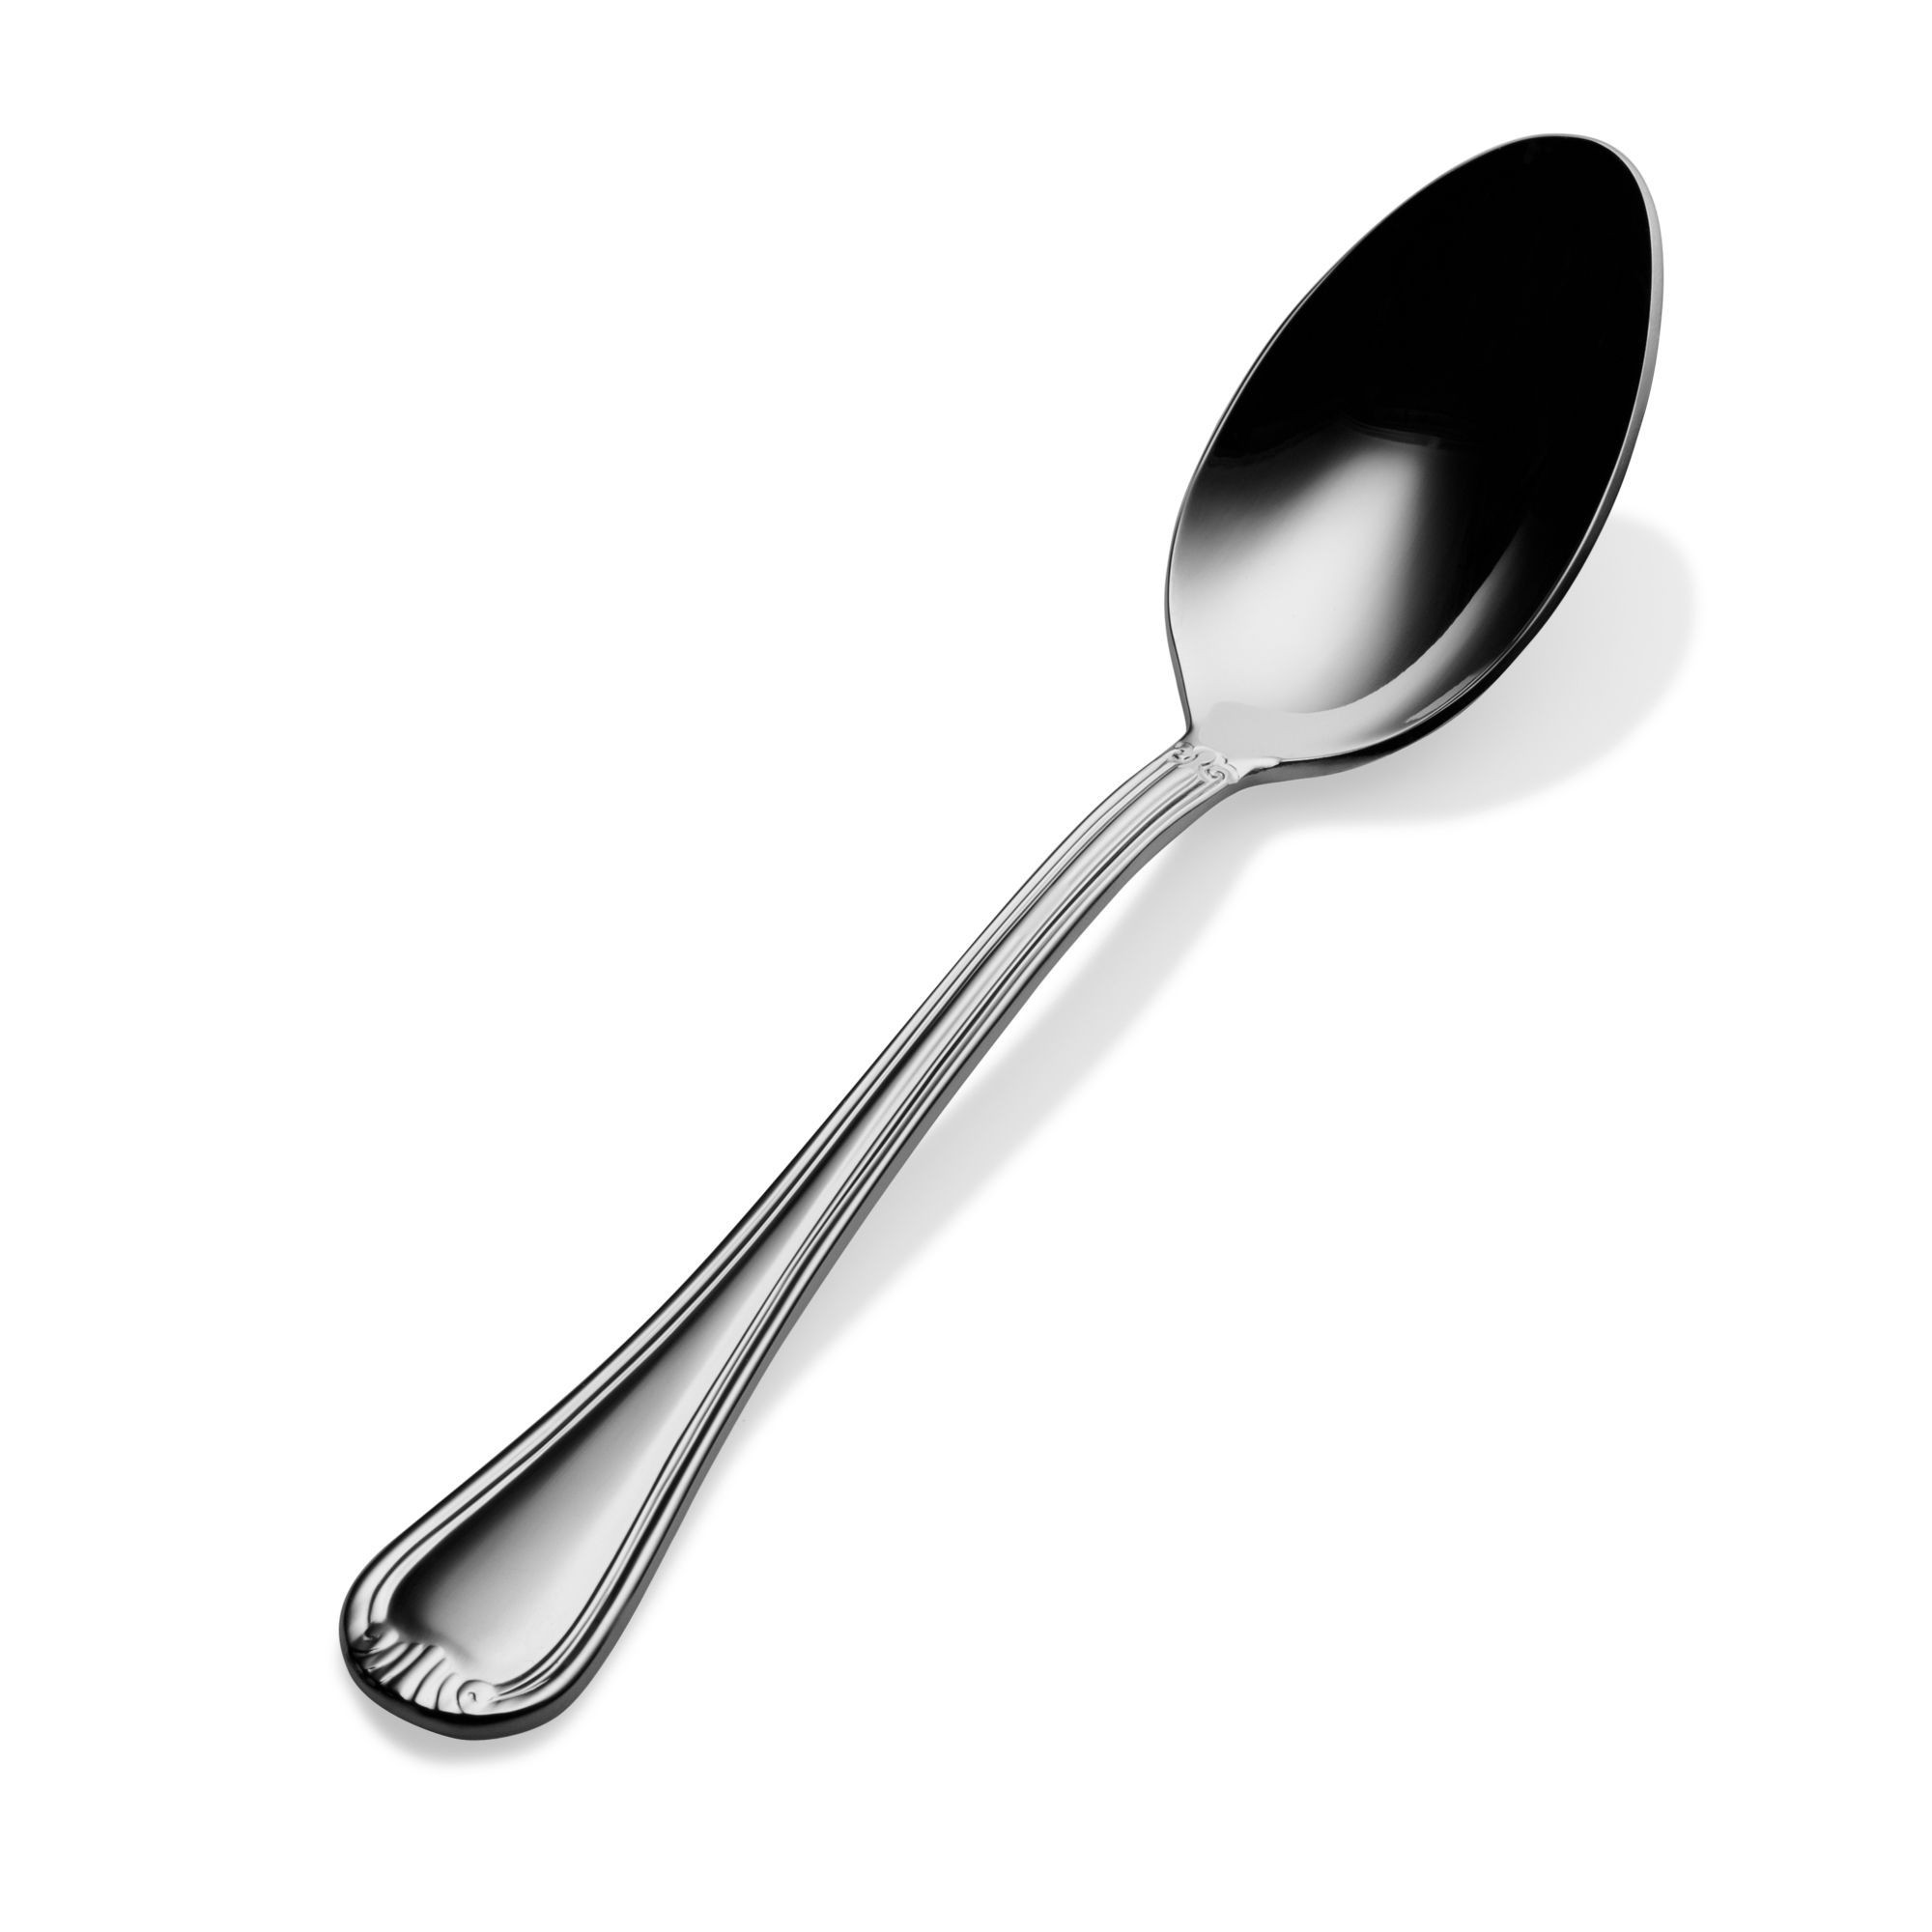 Bon Chef S903S Renoir 18/8 Stainless Steel Silverplated Soup and Dessert Spoon